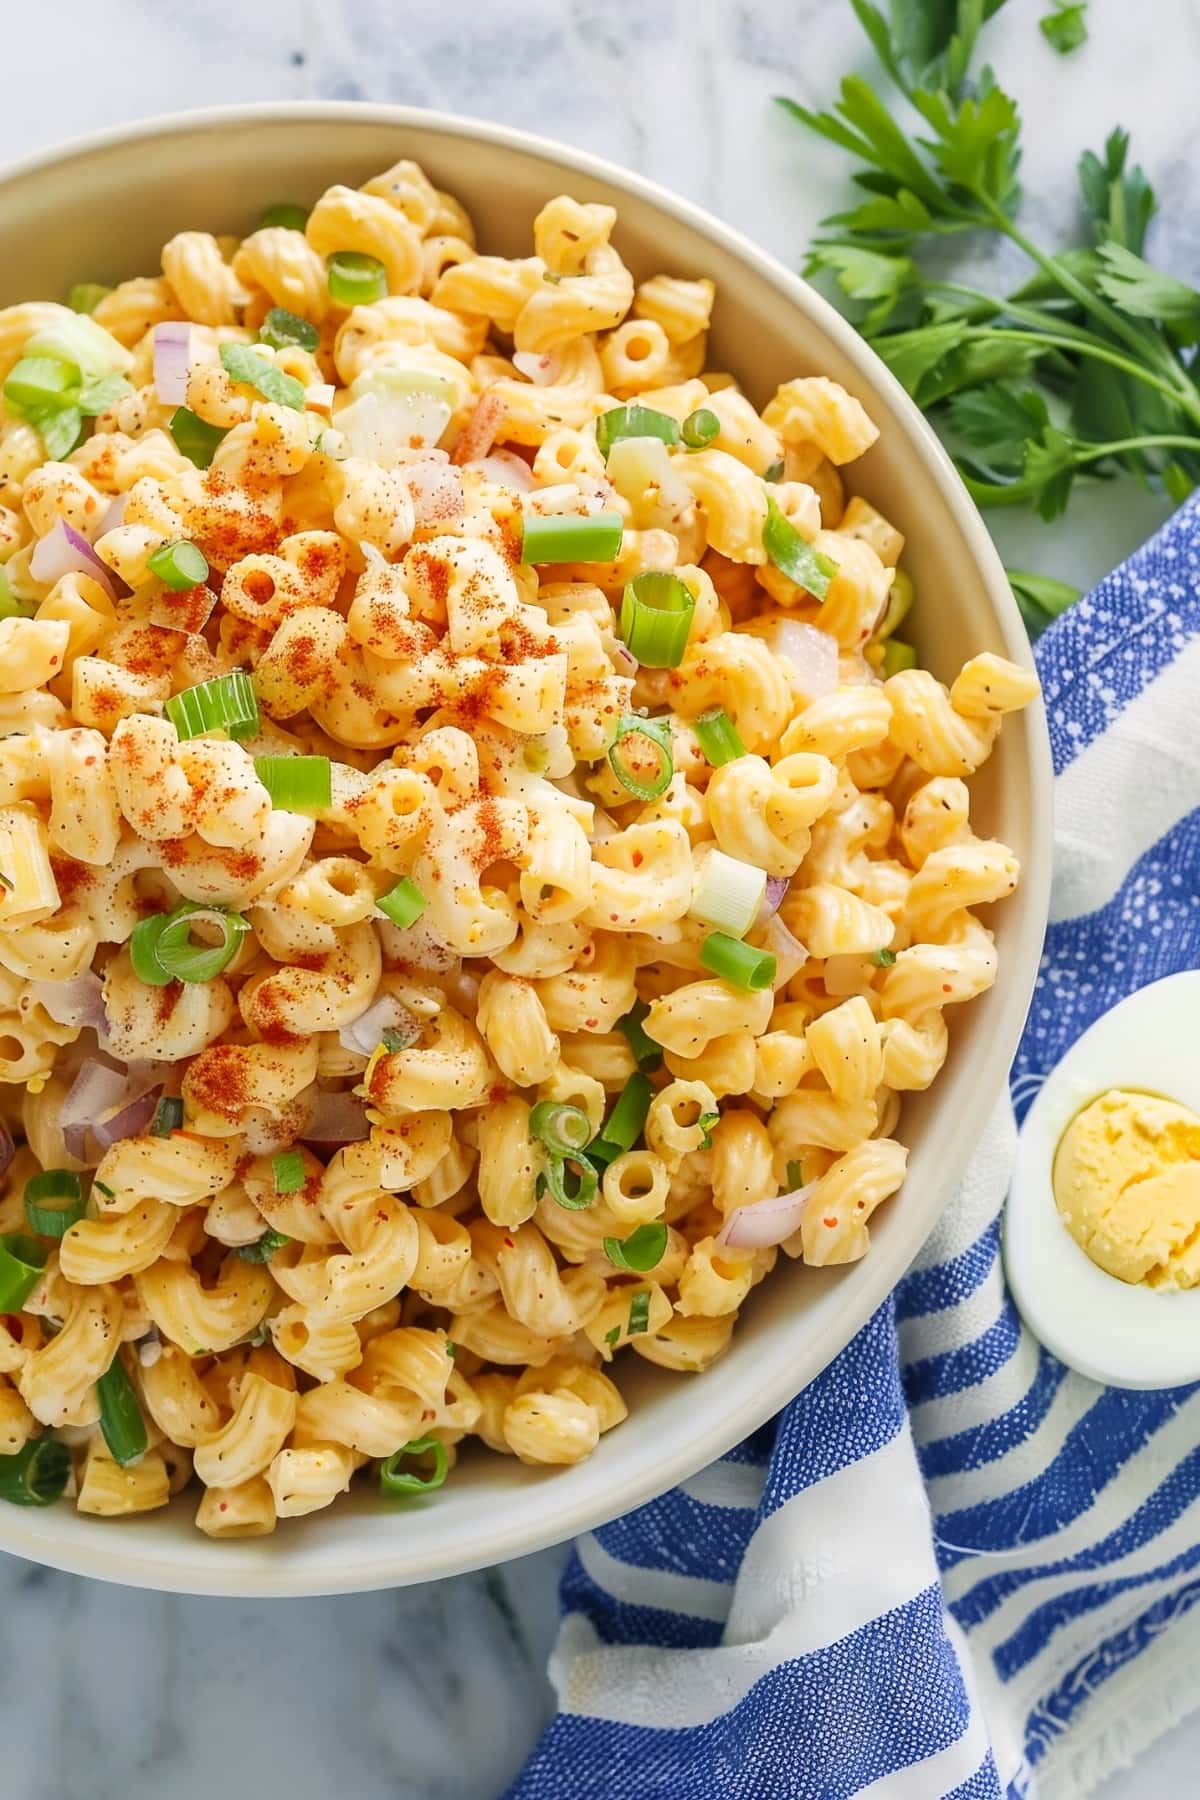 Homemade deviled egg pasta salad with paprika, celery and onions